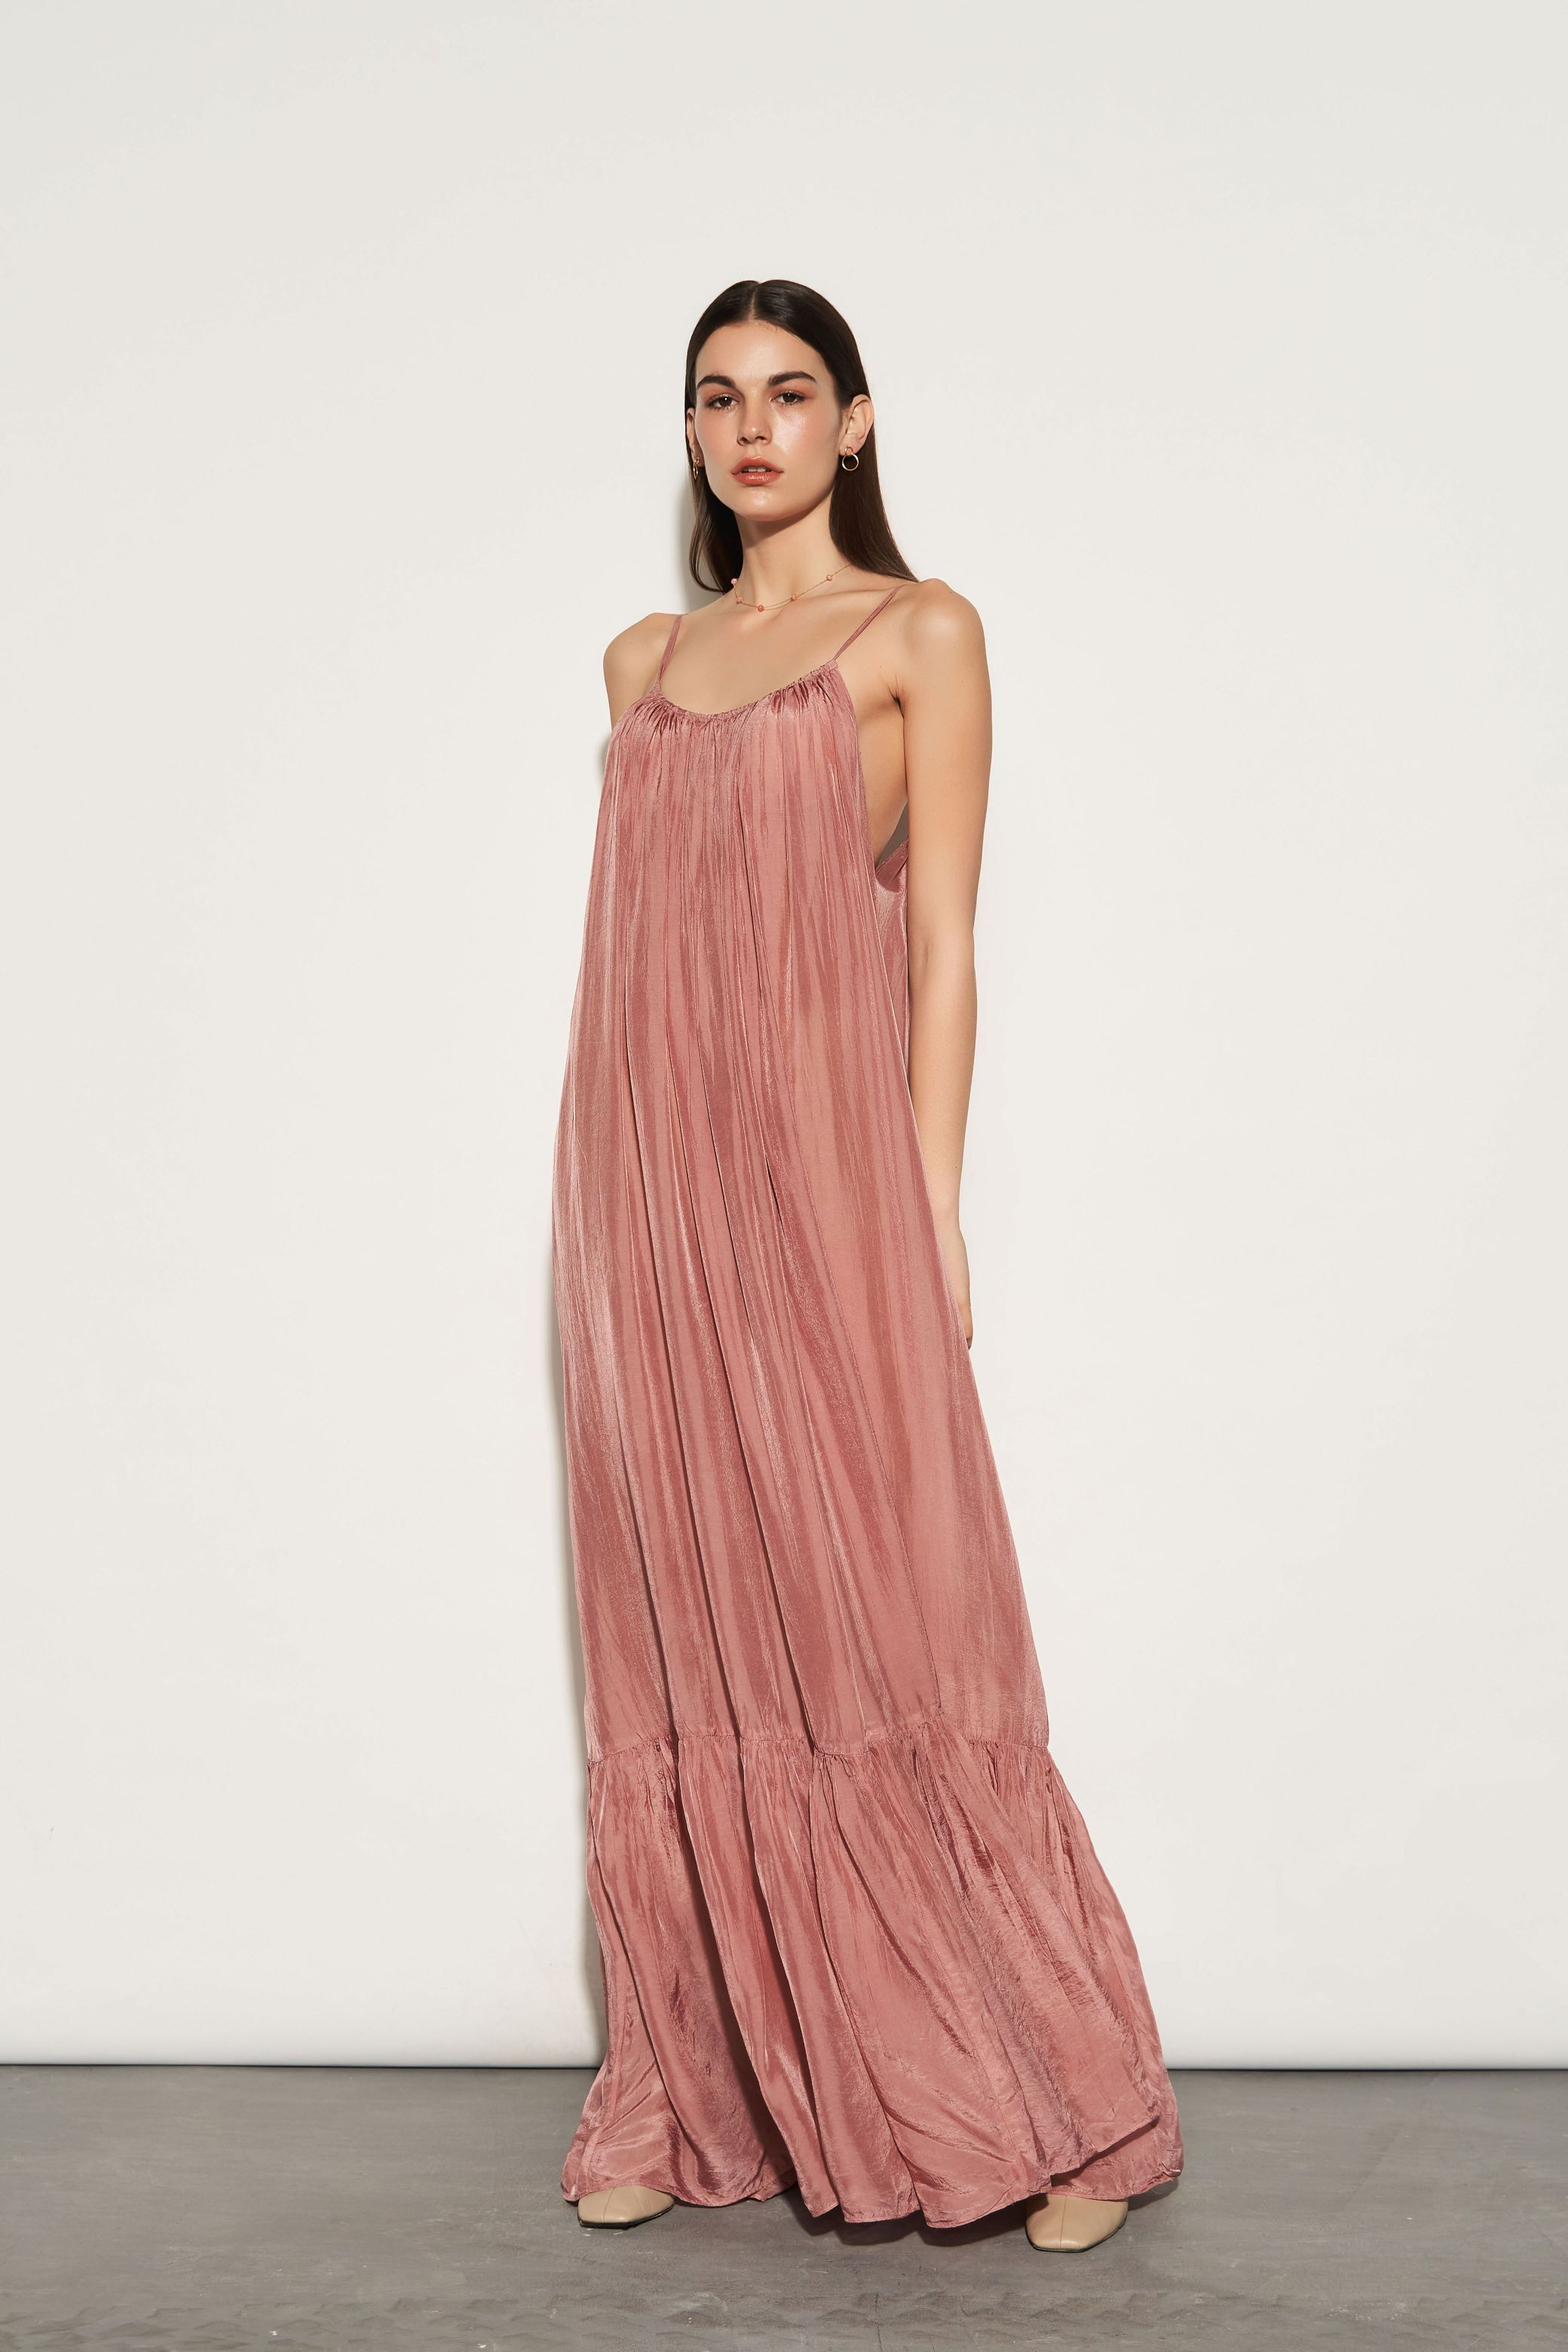 Rosy Brown Maxi Dress